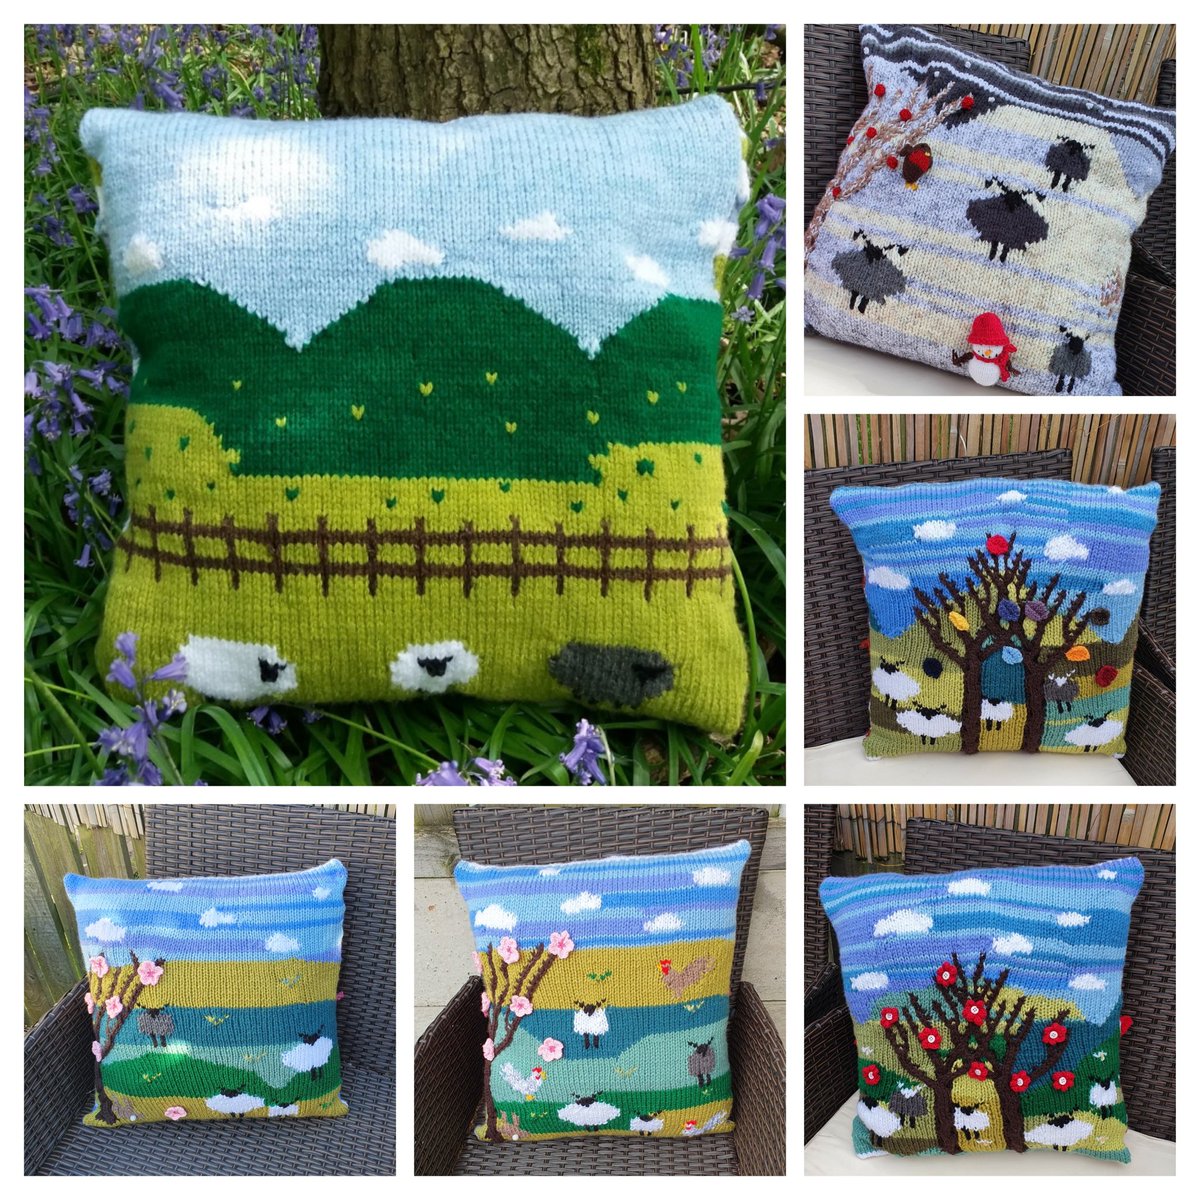 Wow, the picture on the top left was my 1st scenic cushion cover i knitted 6 years ago, which inspired me to knit the others in the photo. I think I have improved 🤣🌸🐑